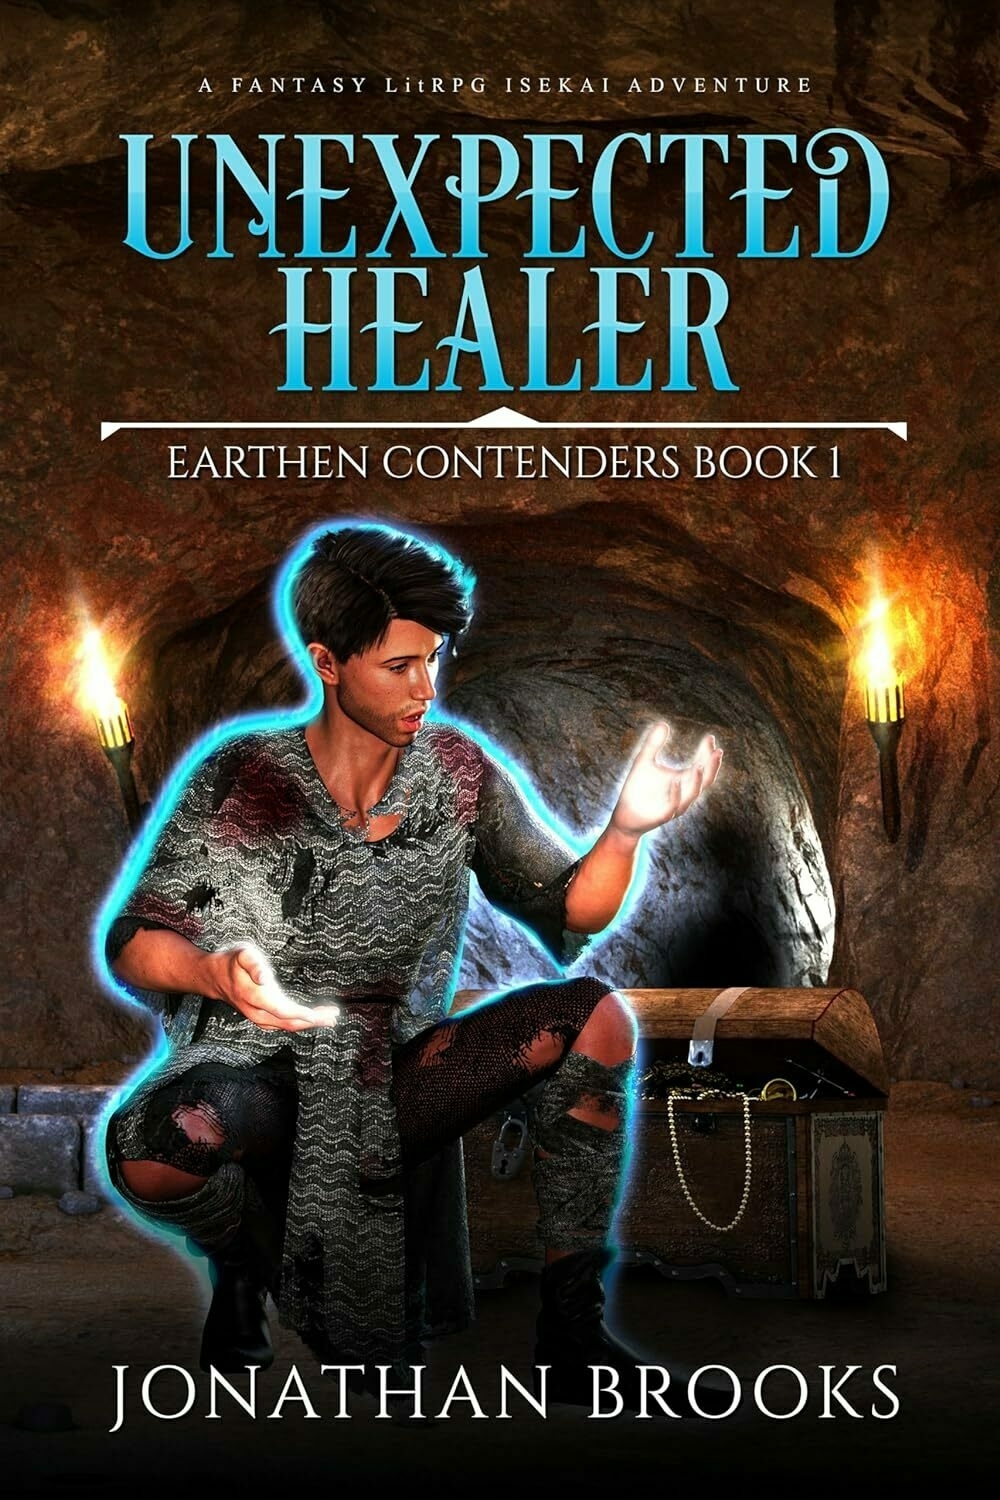 A man generates a glowing blue light between his hands, seated in a cave-like setting with a lit torch and treasure chest. The text reads: 'UNEXPECTED HEALER - A FANTASY LitRPG ISEKAI ADVENTURE - EARTHEN CONTENDERS BOOK 1 - JONATHAN BROOKS'.